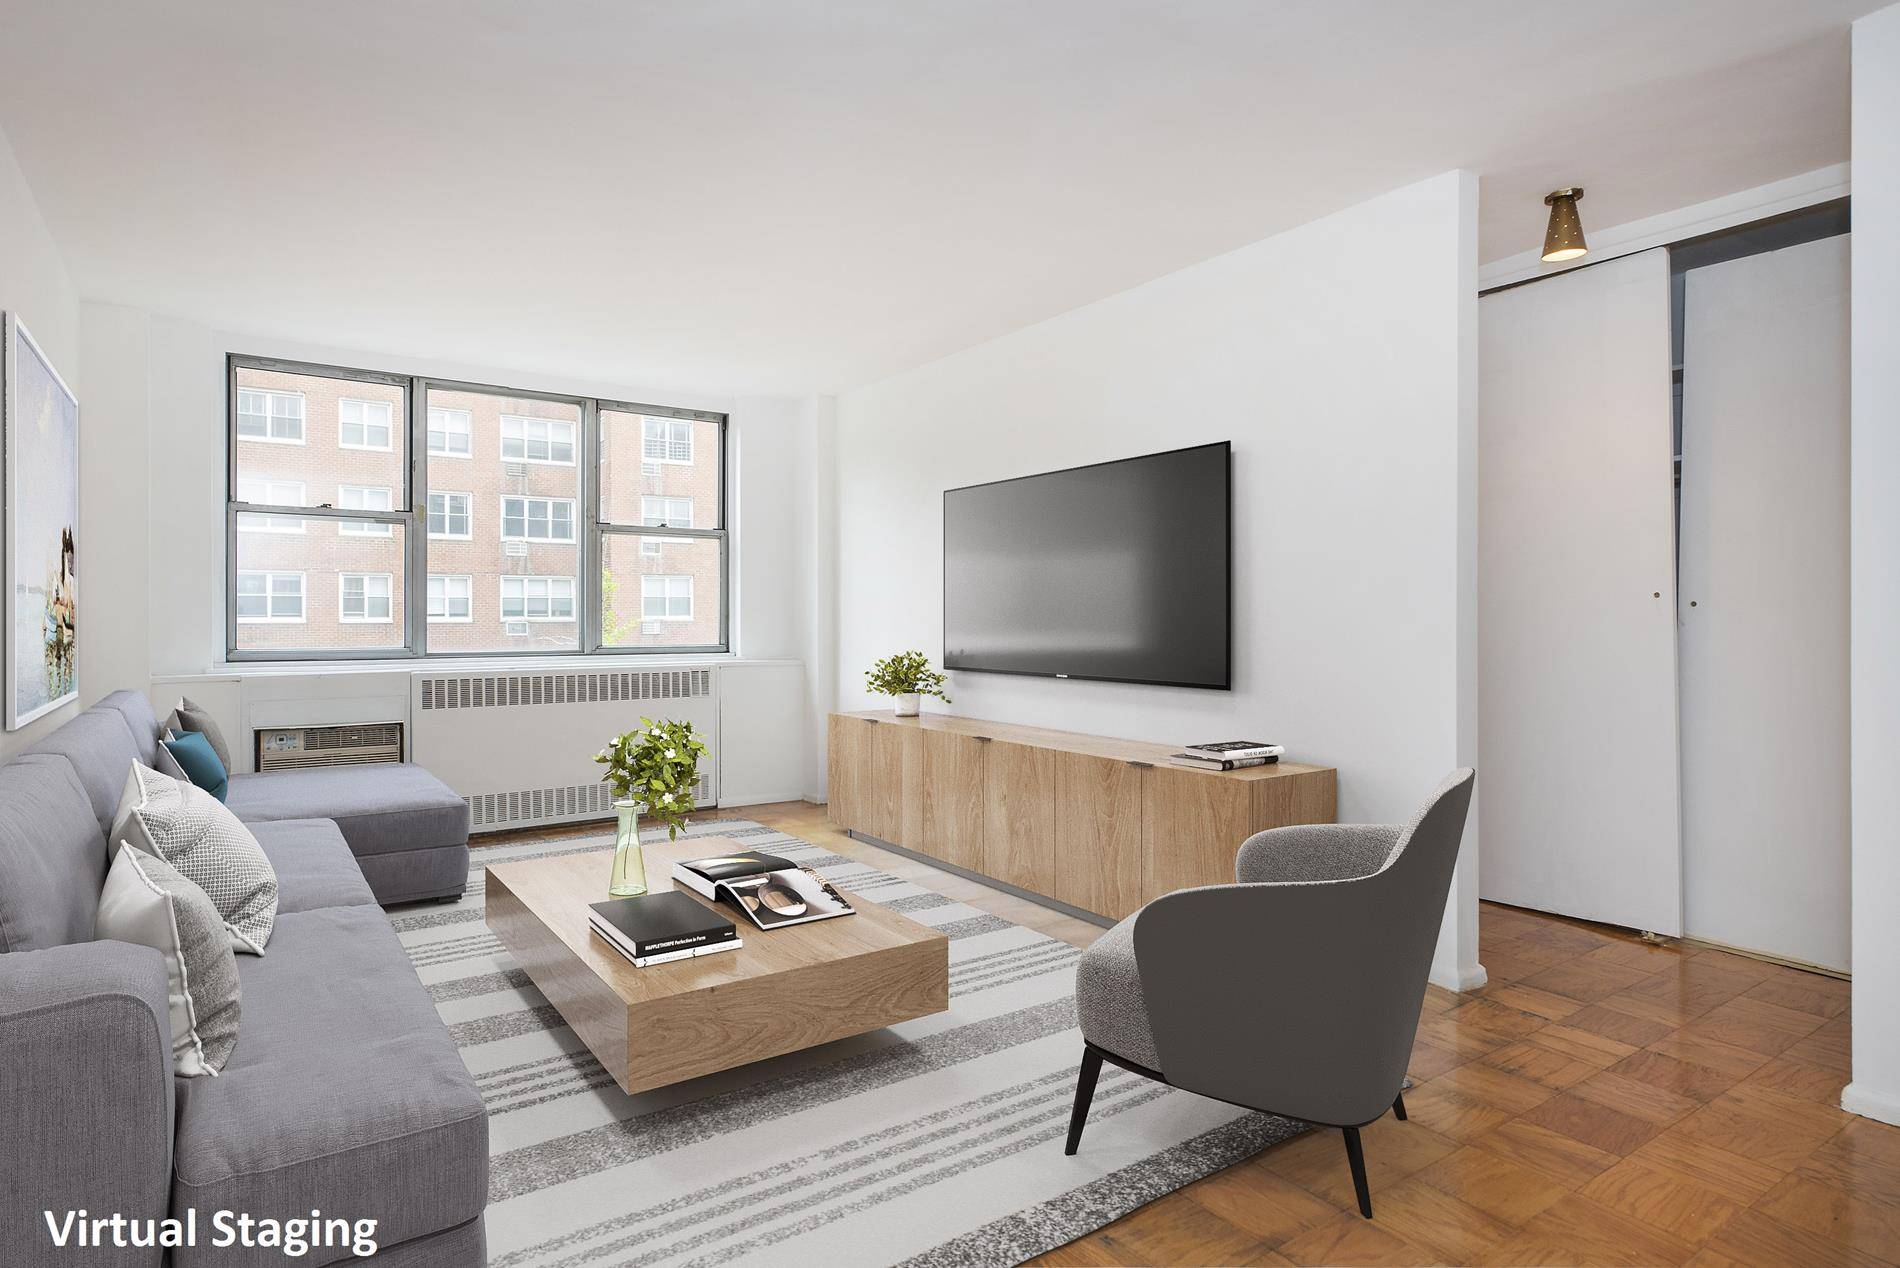 Wonderful opportunity to own and design your dream one bedroom one bathroom apartment with phenomenal light and sky views on Gramercy Park South.